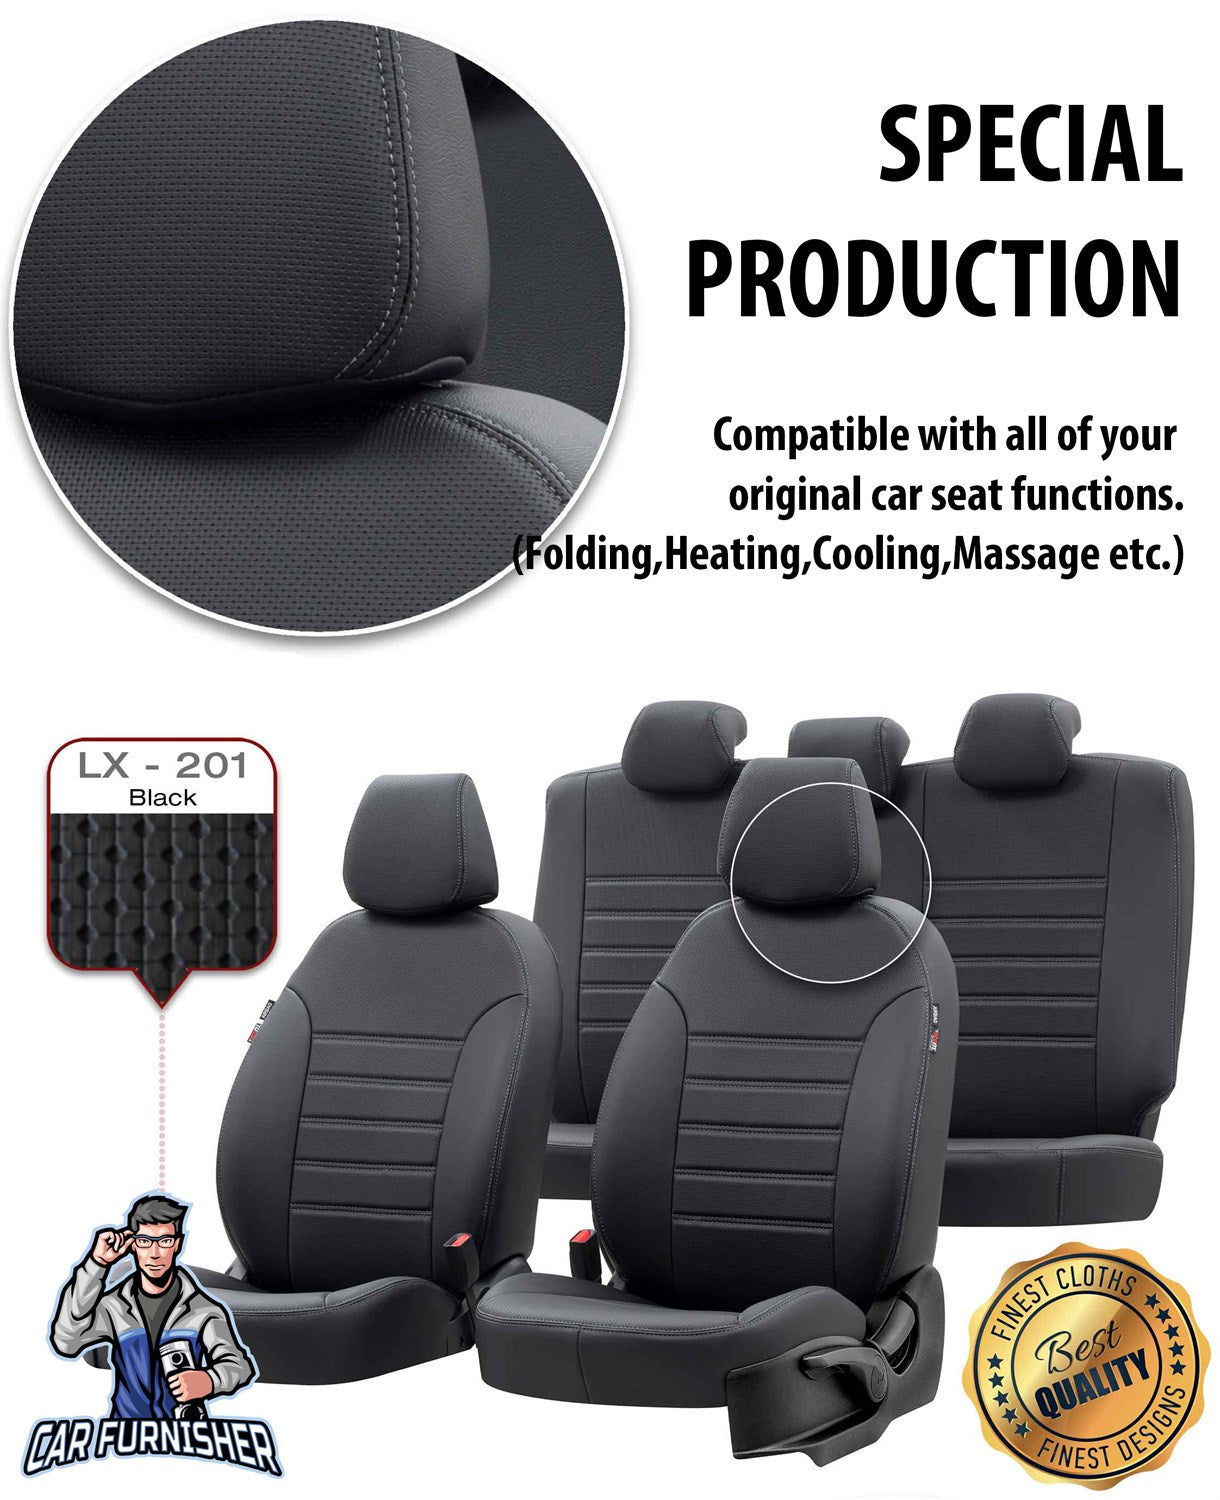 Volkswagen Golf Seat Cover New York Leather Design Smoked Leather